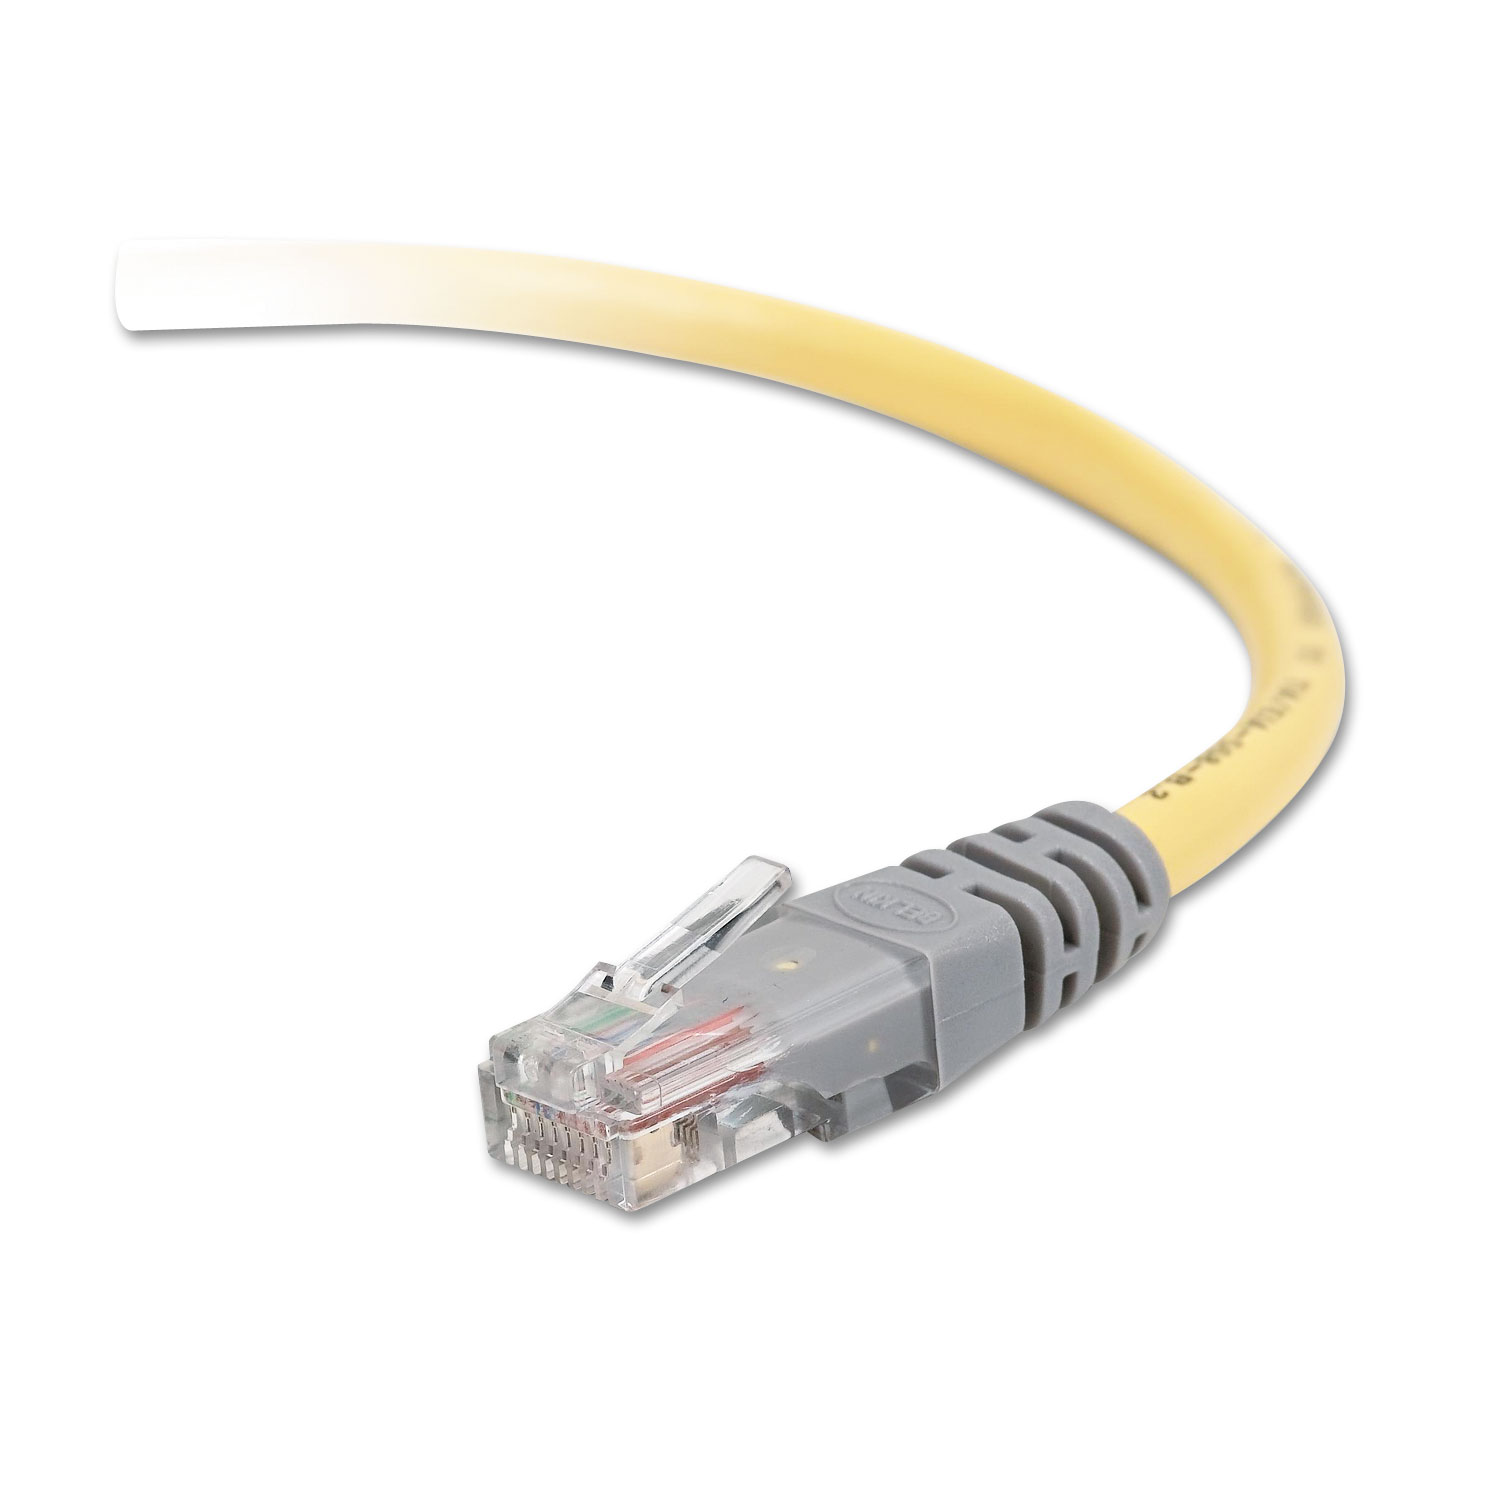 CAT5e Molded Crossover Patch Cable, RJ45 Connectors, 50 ft., Yellow